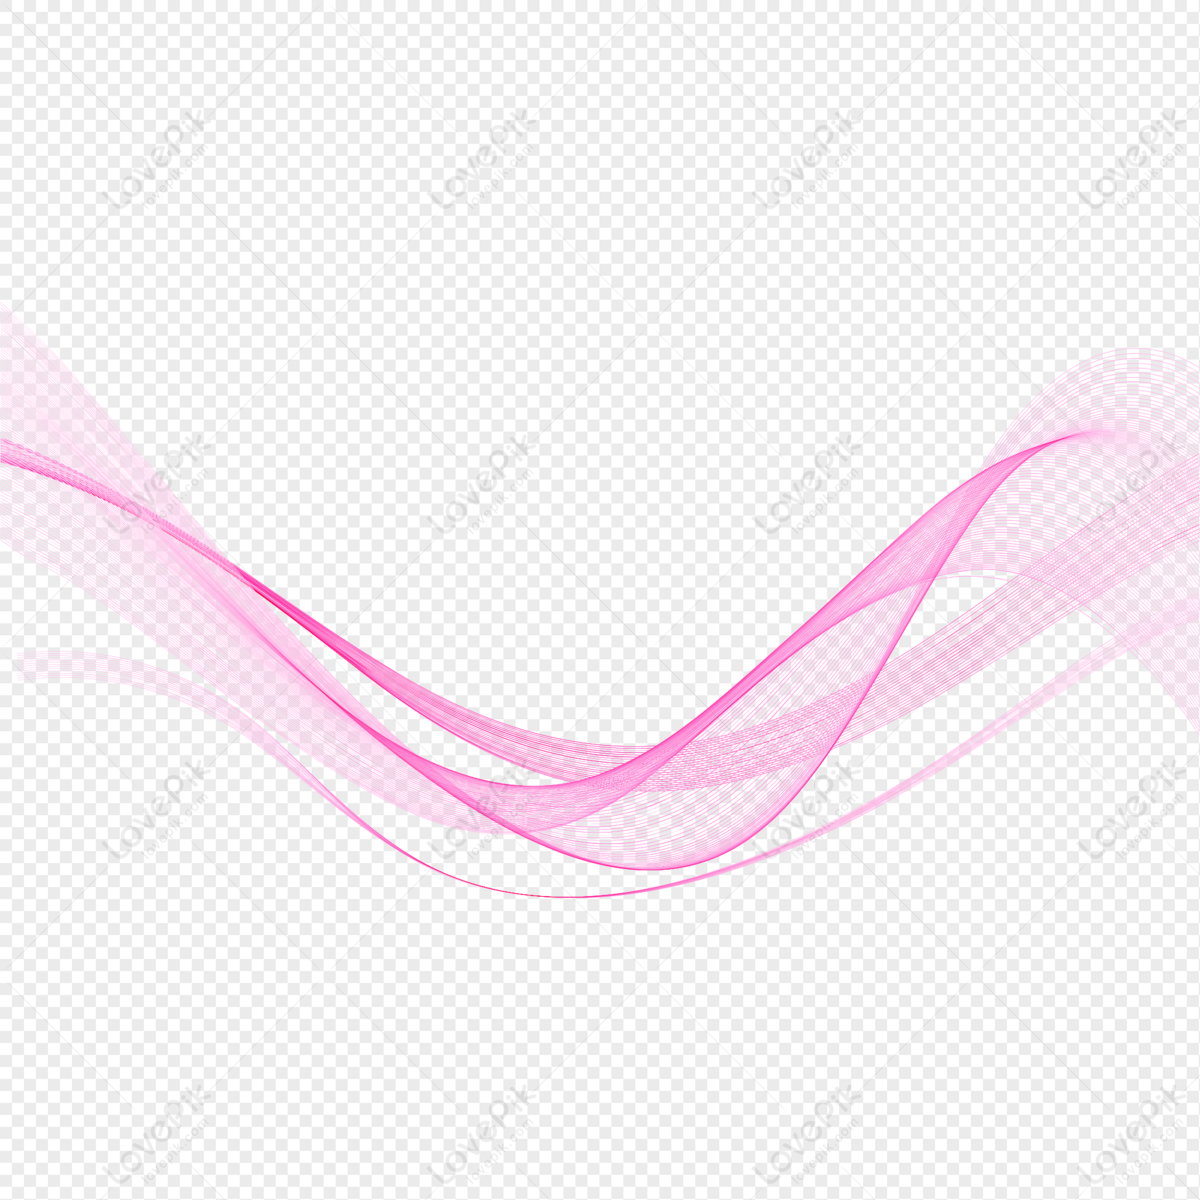 Yarn-like Streamlined Pink Gradient Business Curve, Texture